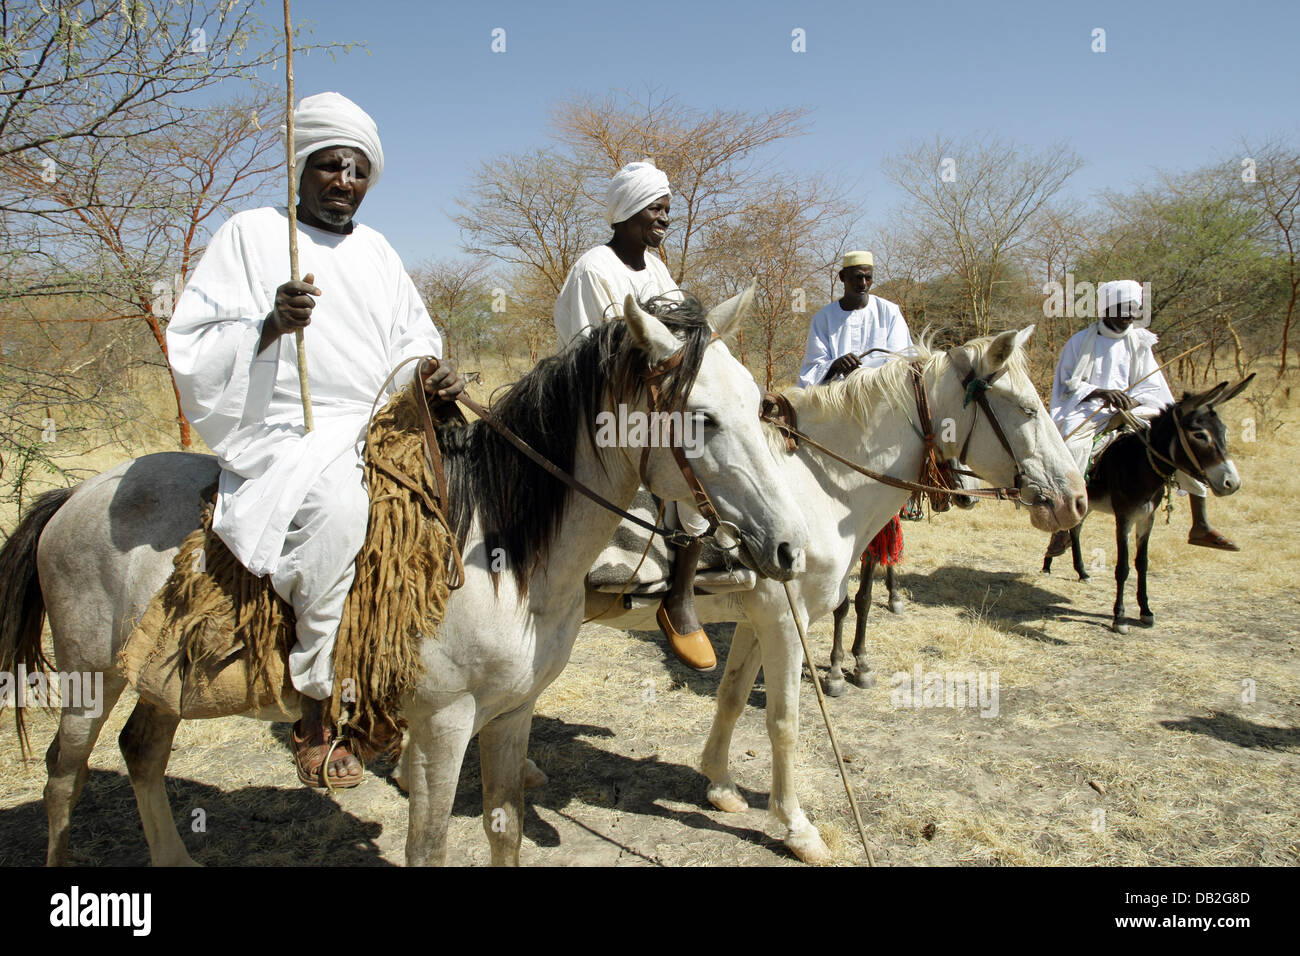 Villagers sit on their horses and cater for security on the roads near the village of Buru in Western Dafur, Sudan, 11 December 2007. Photo: Peter Steffen Stock Photo